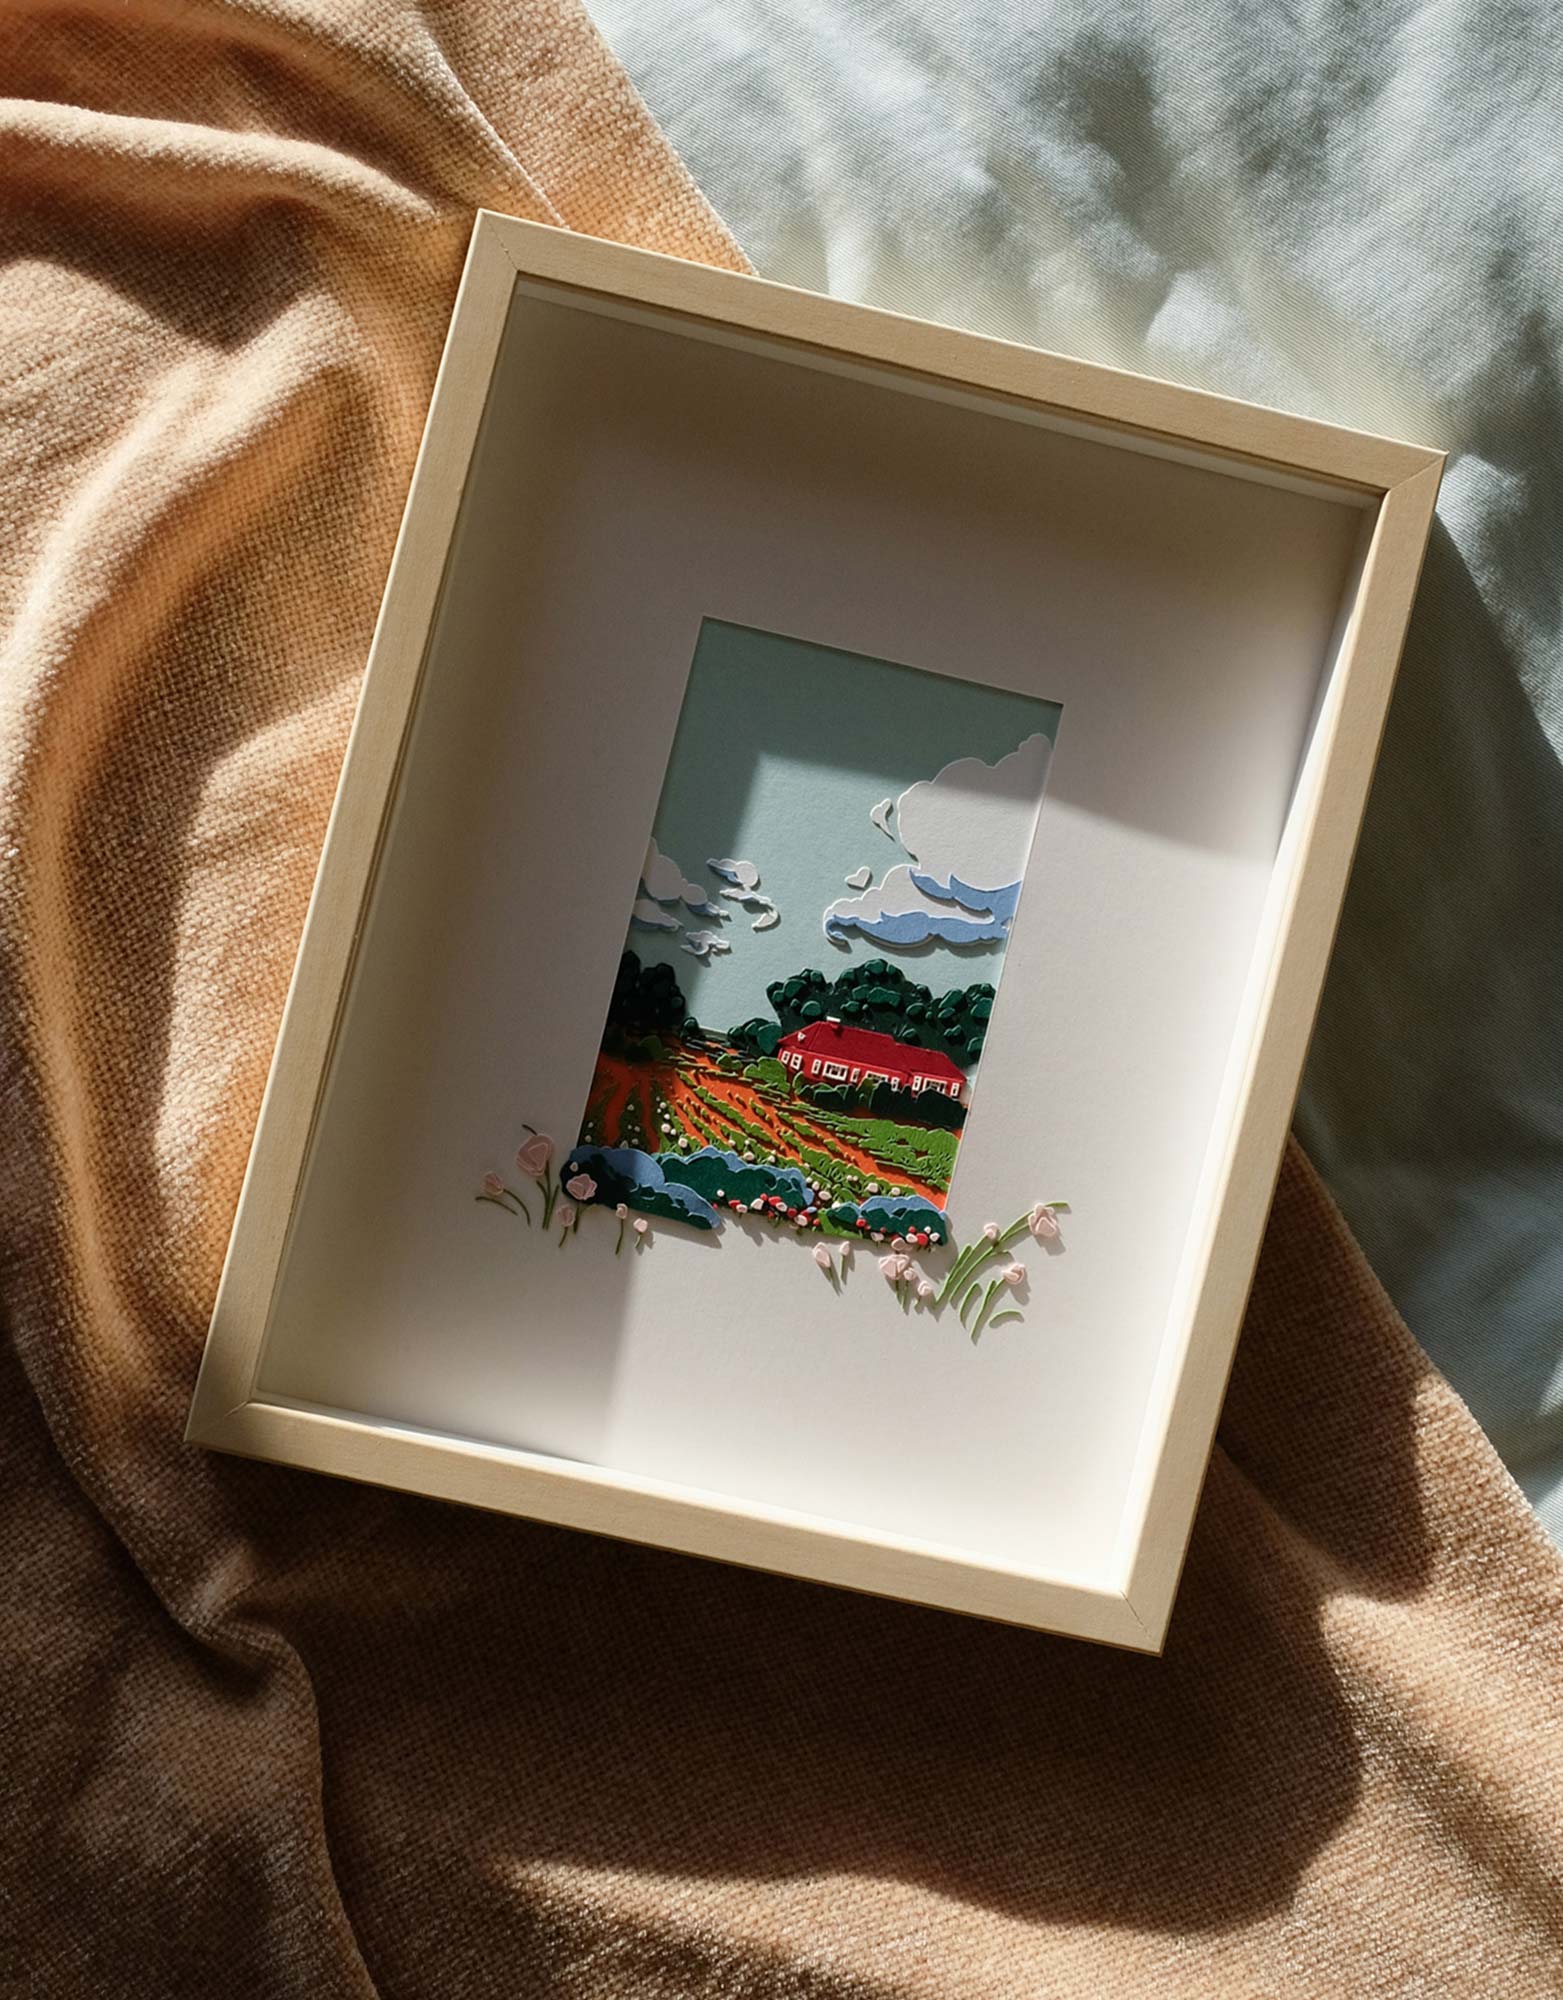 The framed artwork lies on a backrop of sky blue and neutral fabrics under strong sunlight.